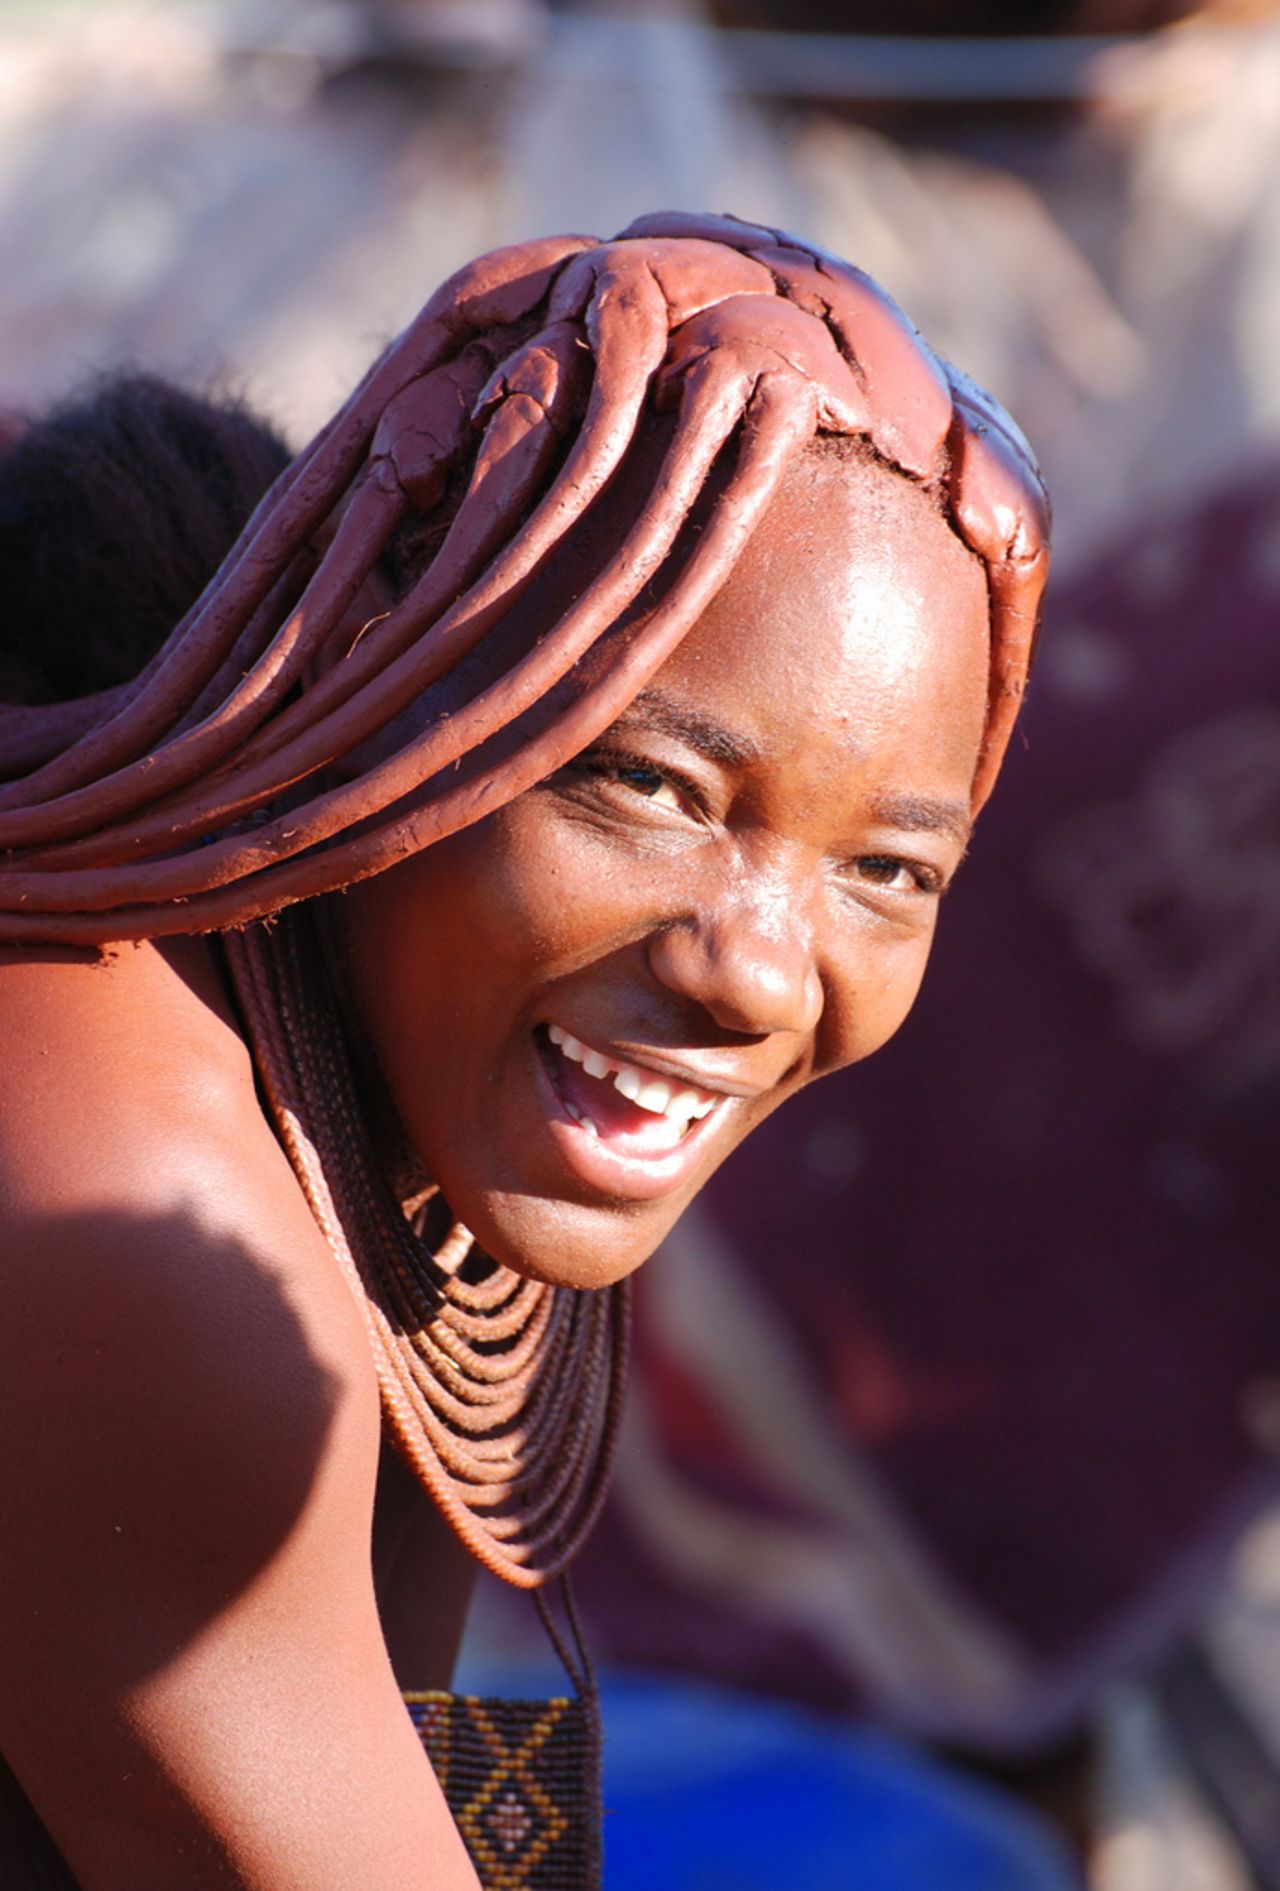 The Himba: Namibia's iconic red women | CNN